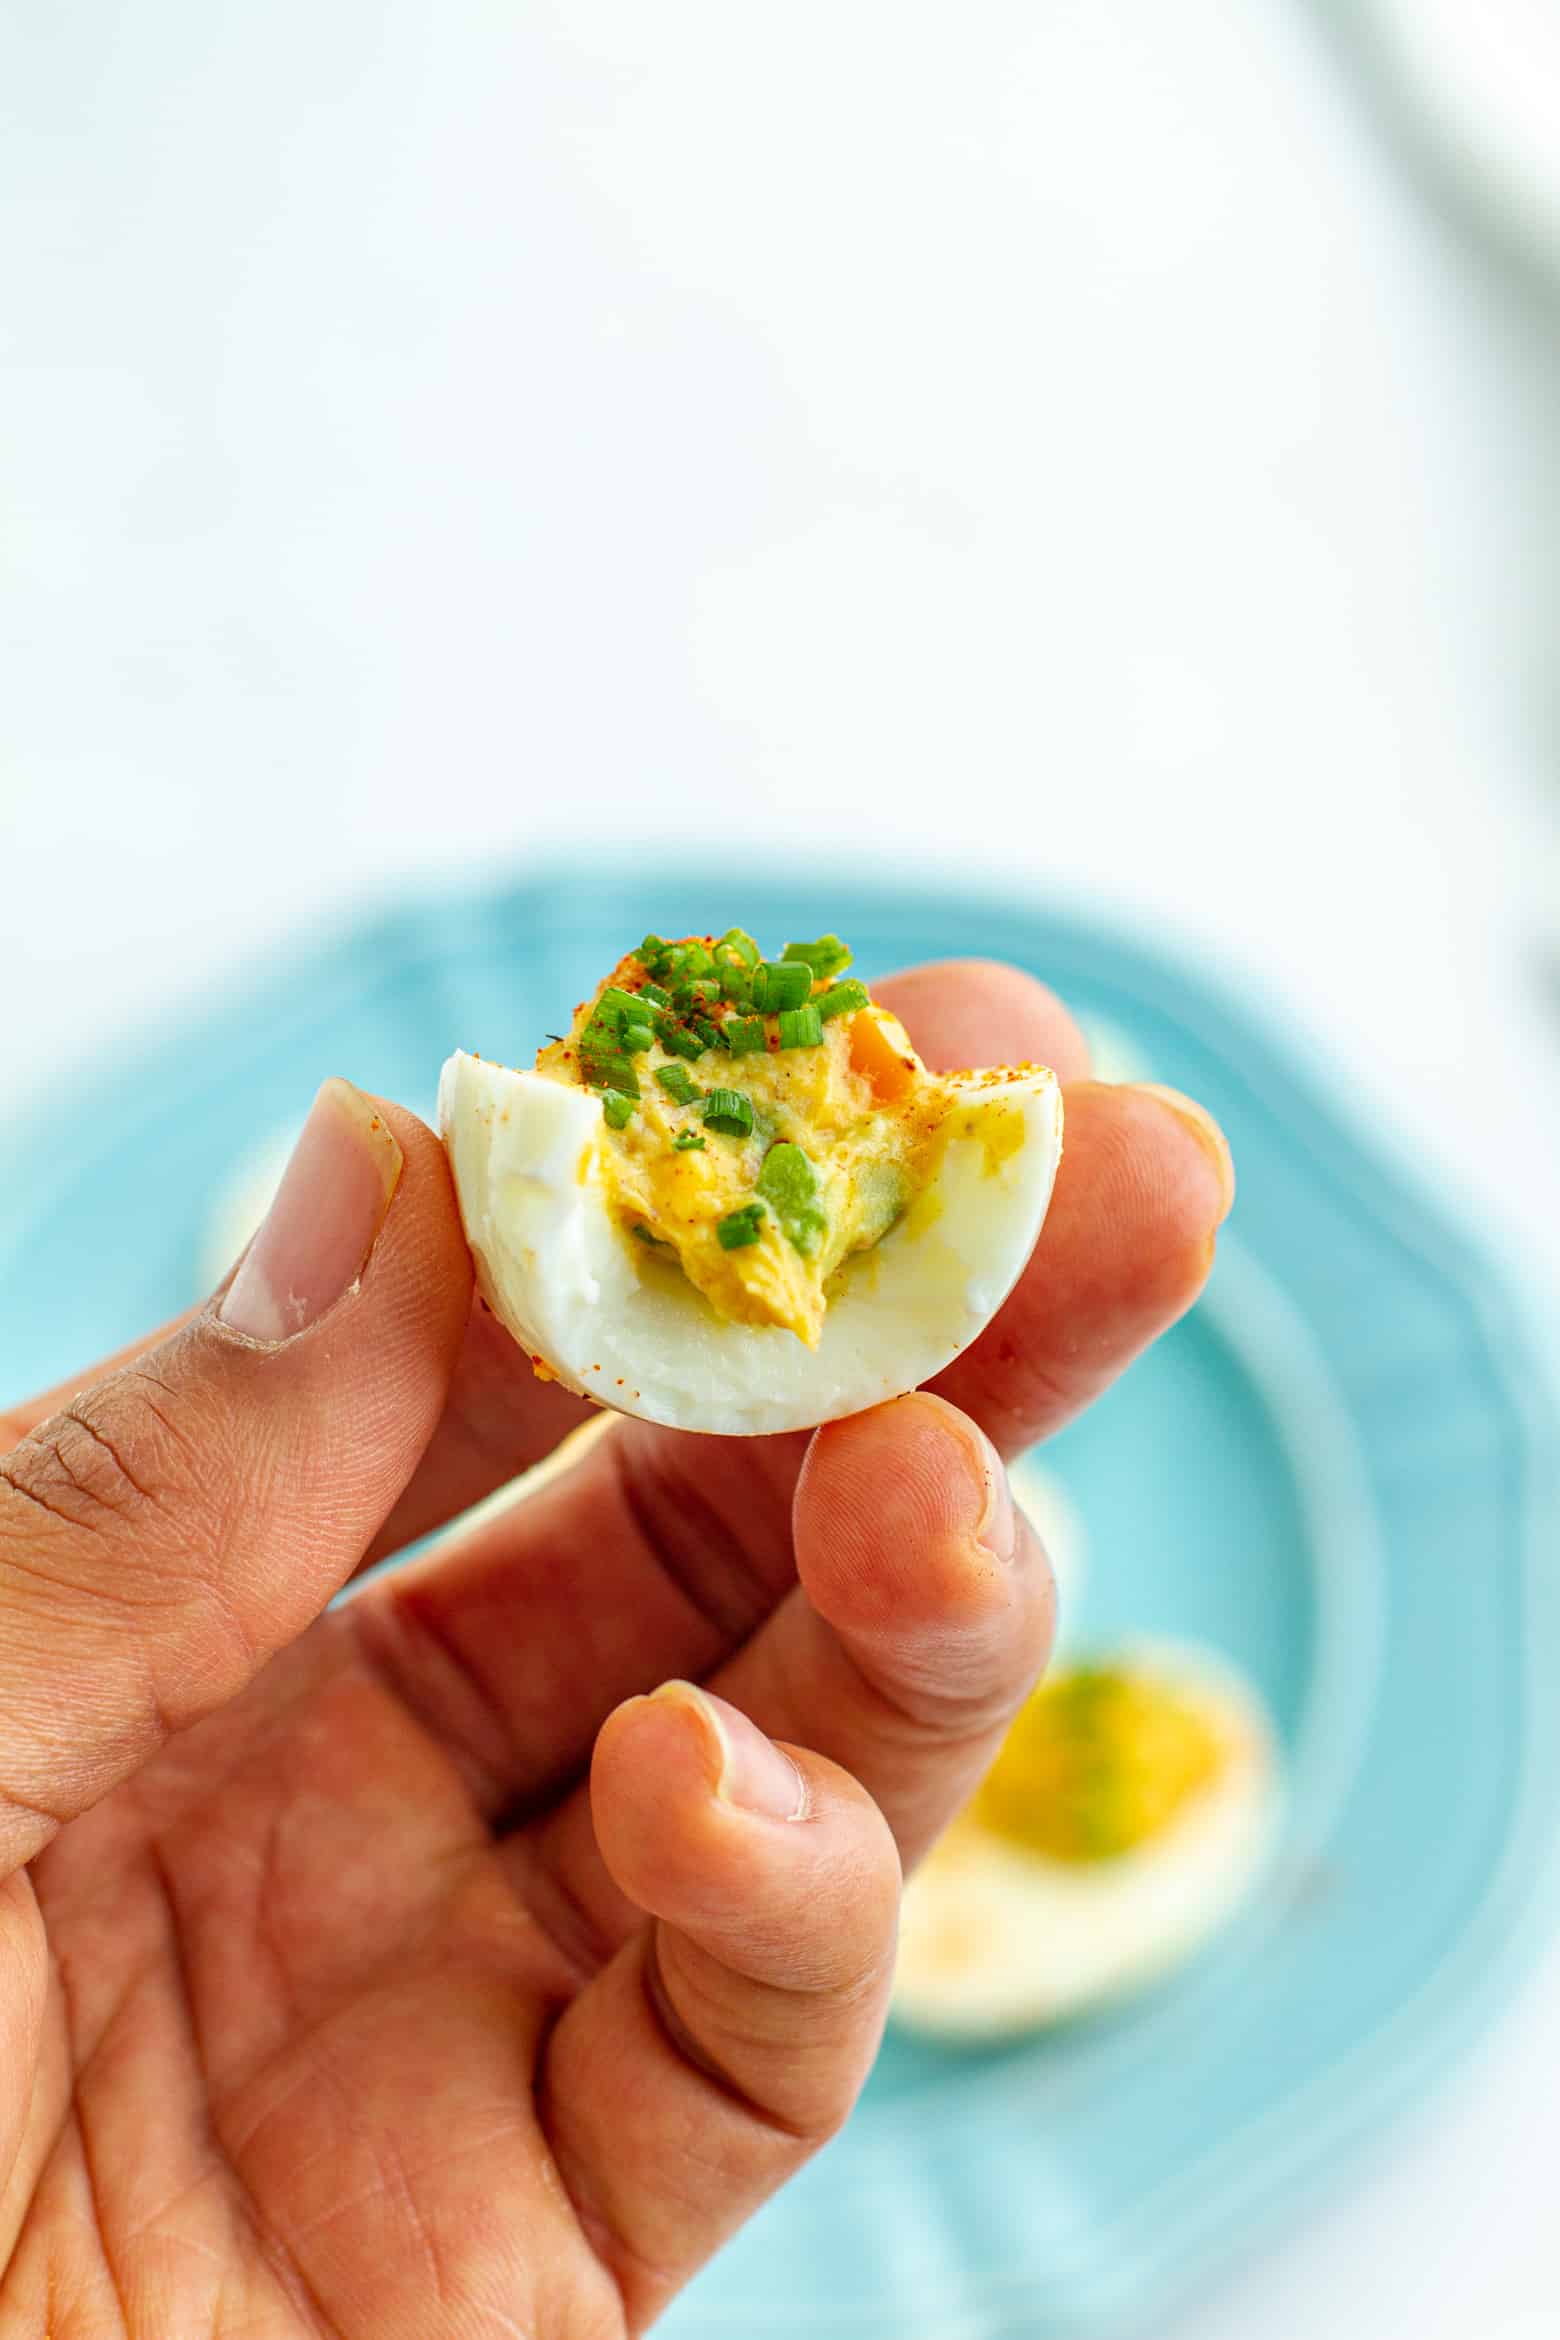 Cajun Deviled Egg with a bite taken out being held in a hand.